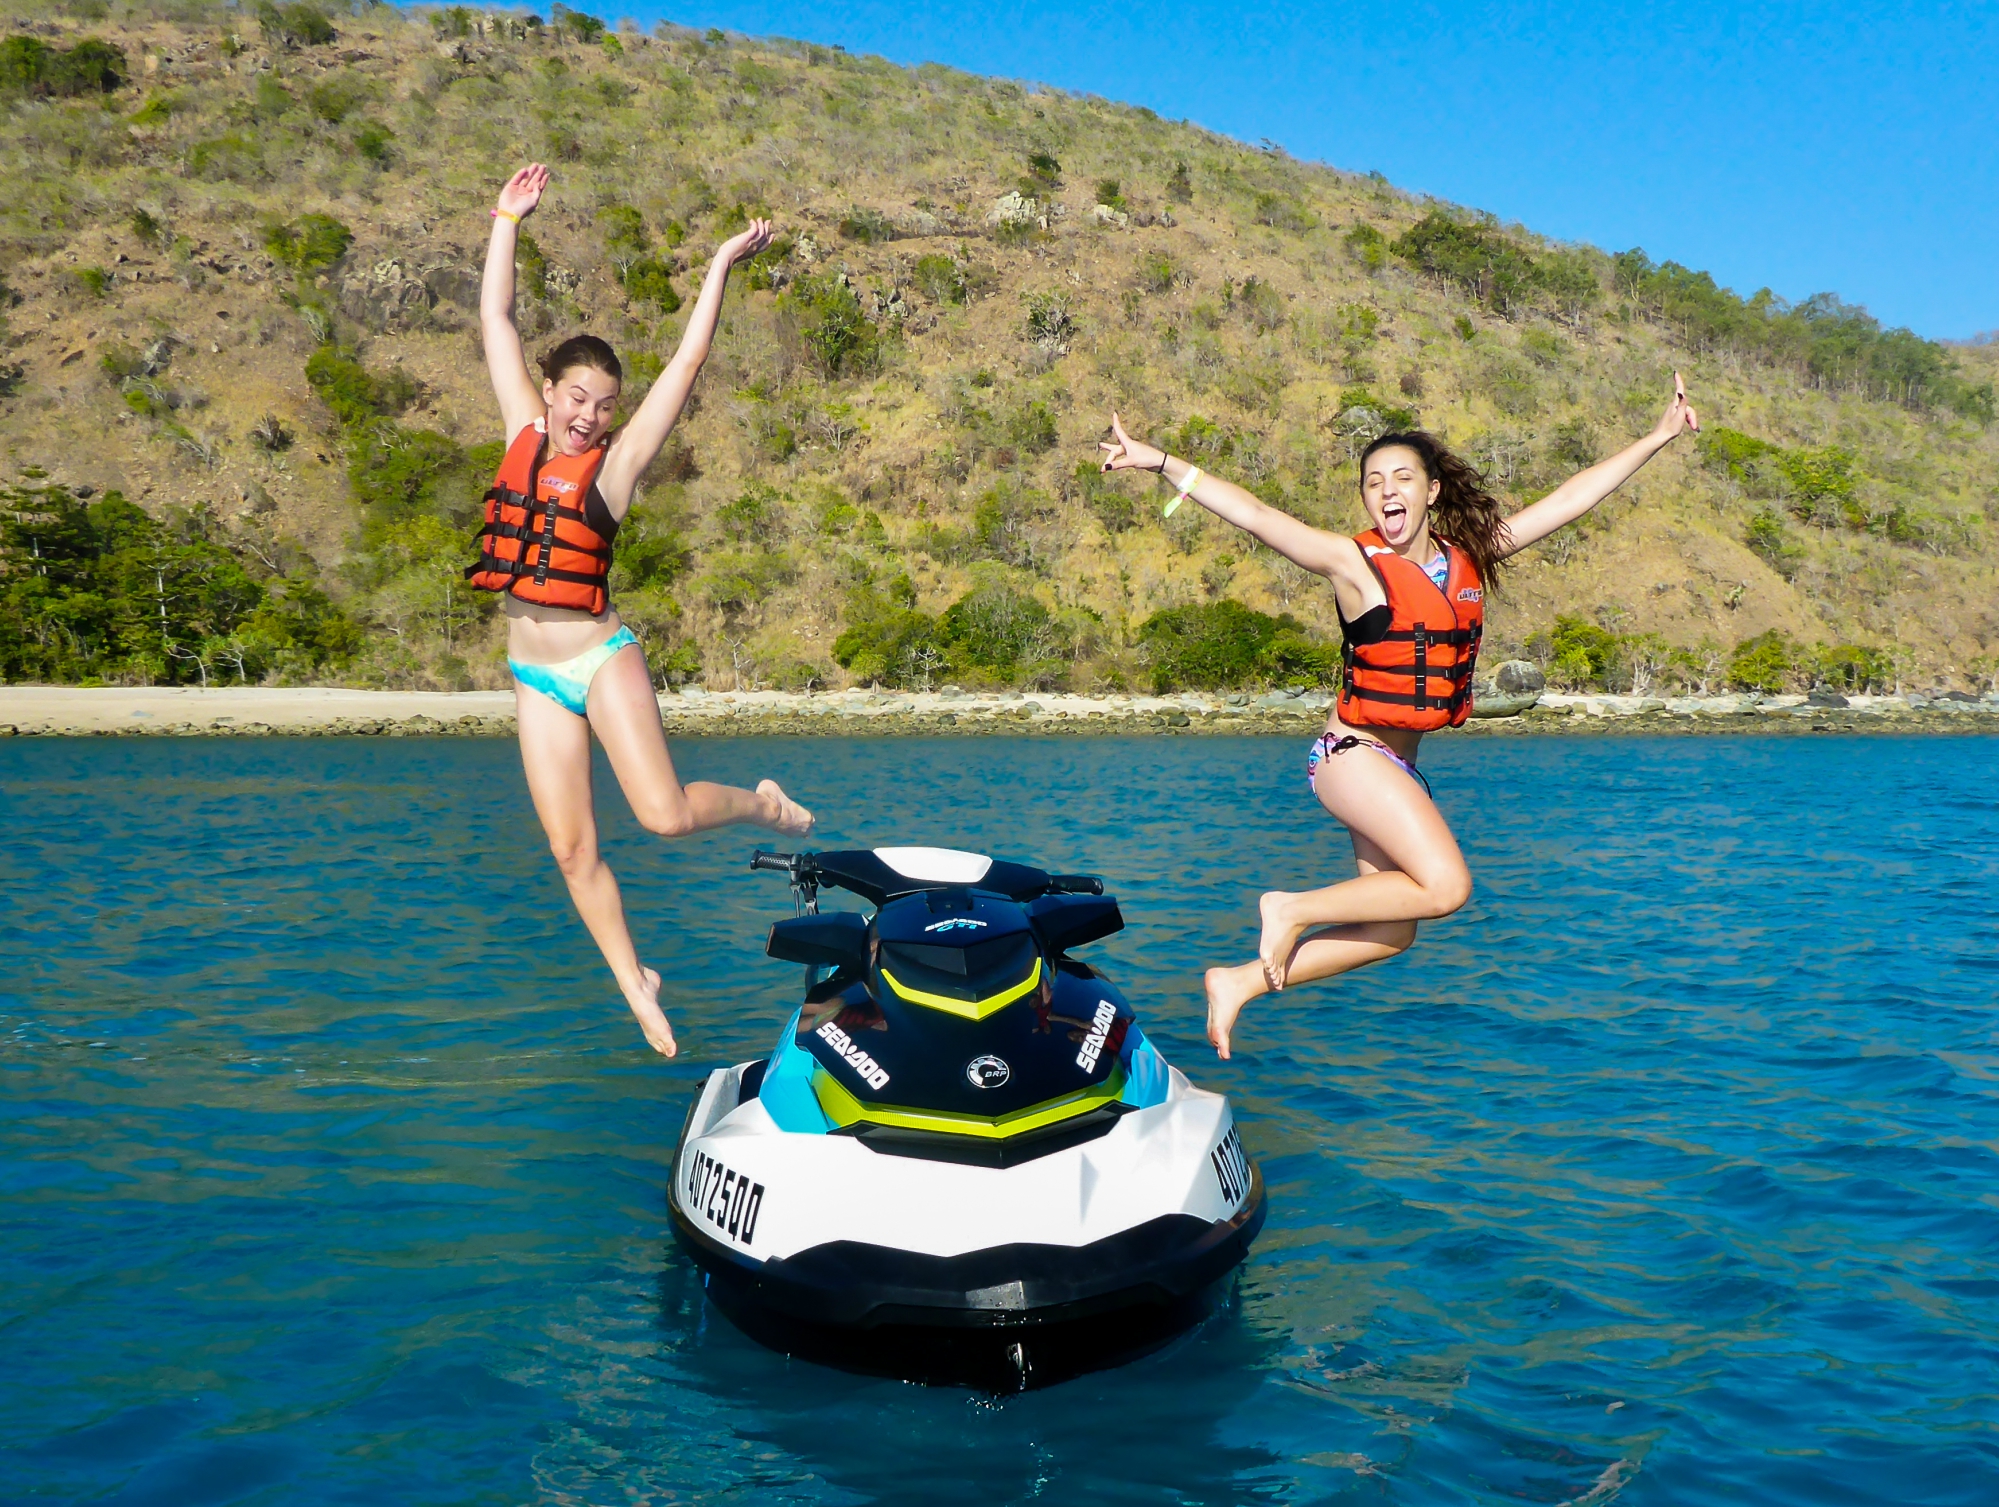 RIDE AND RAFT COMBO 1 - JETSKI AND OCEAN RAFTING PACKAGE